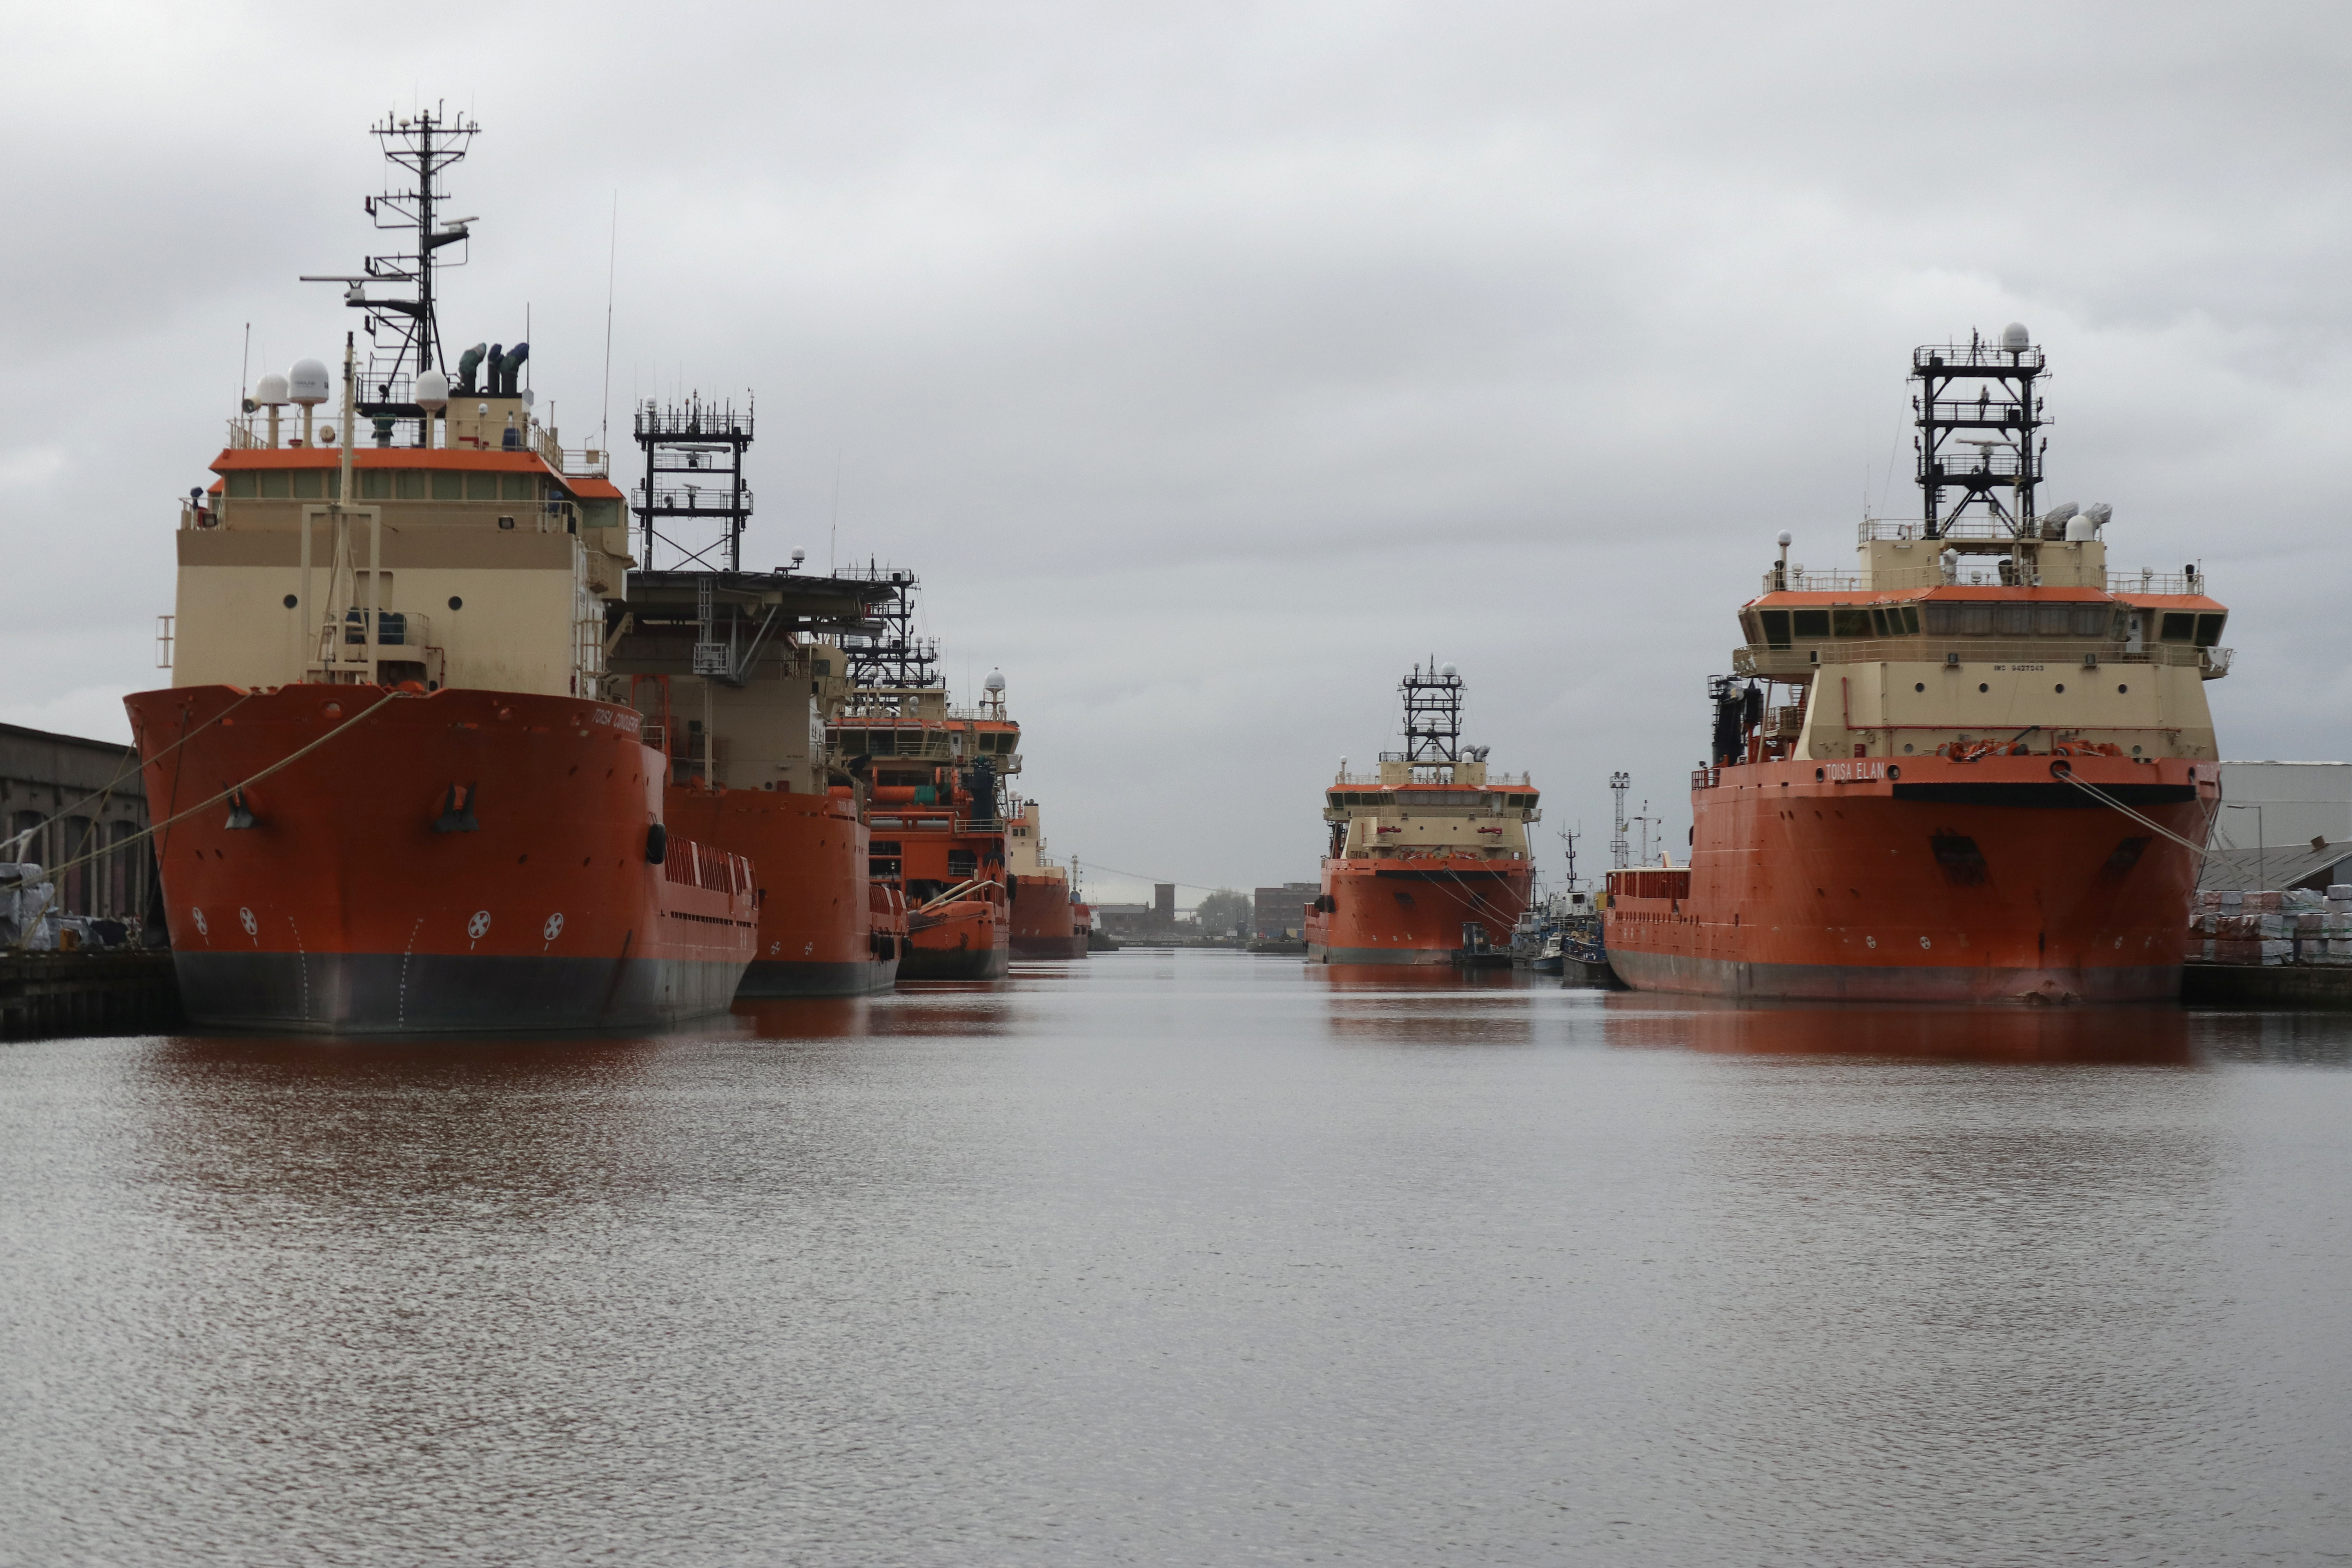 Vessels that are used for towing oil rigs in the North Sea are moored up at William Wright docks in Hull